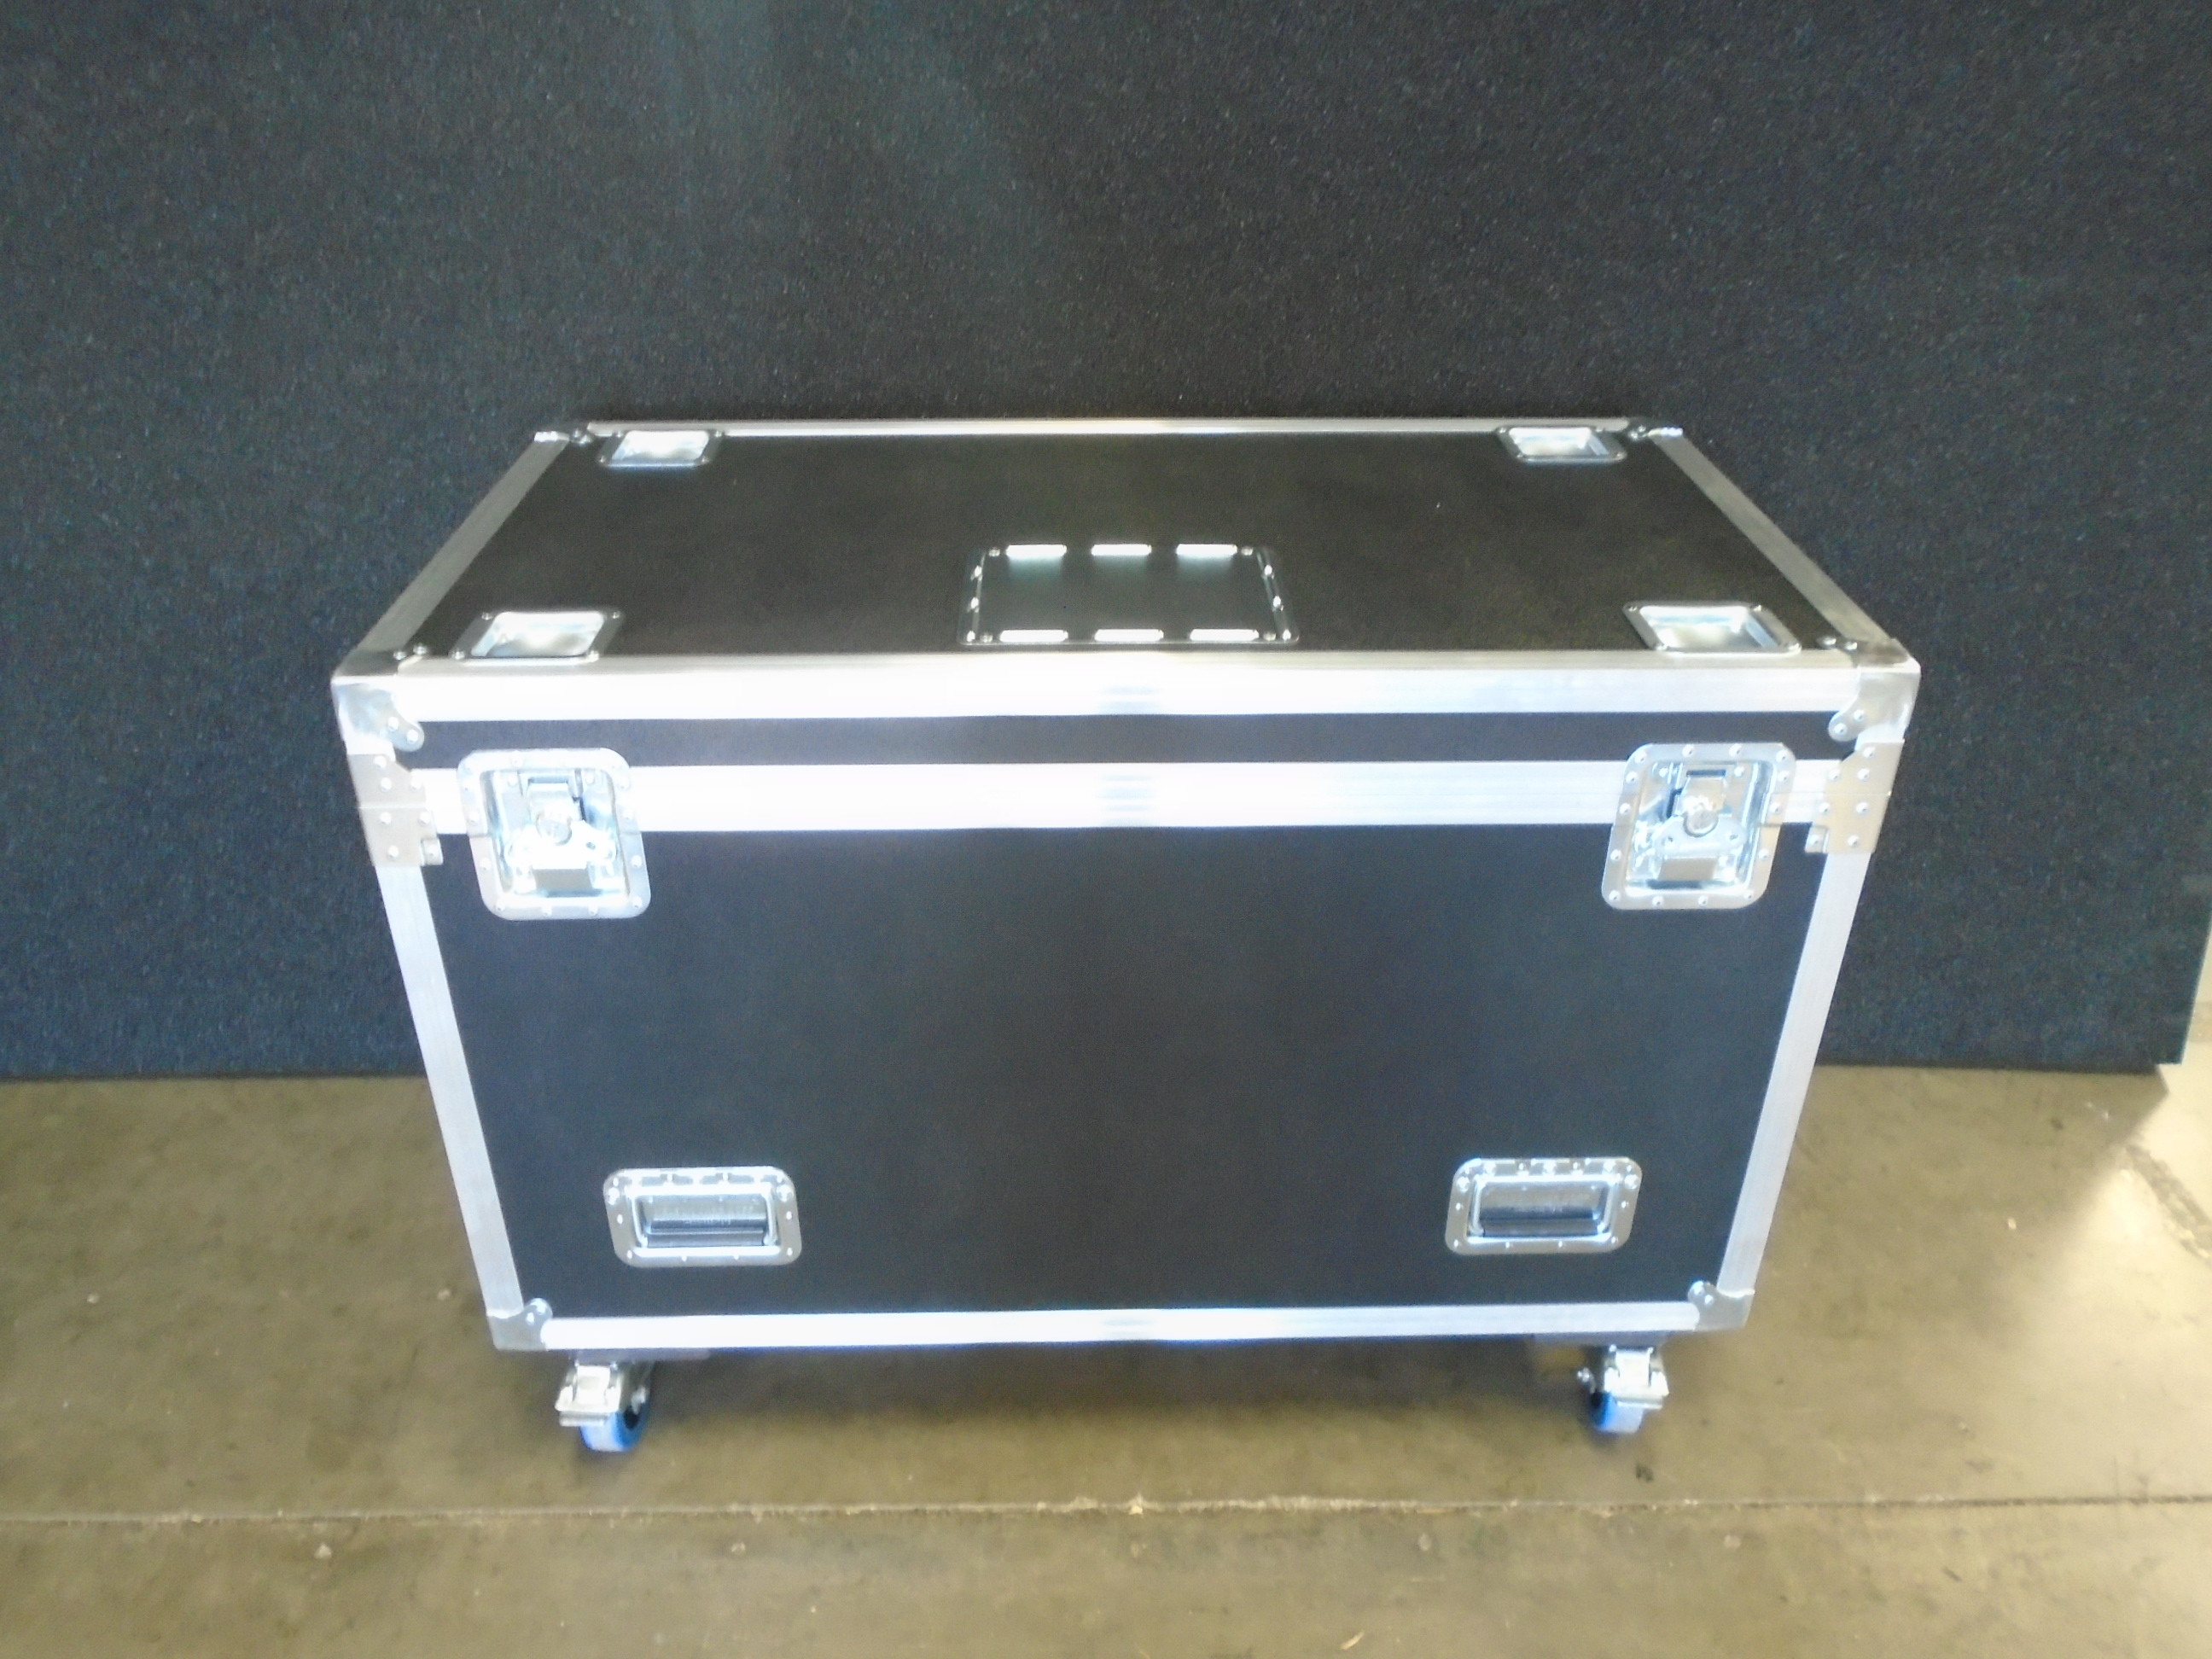 Print # 9119 - Custom Road Case for 8-Pack Chauvet COLORado Batten 72 Tour Linear Wash Lighting Kit By Nelson Case Corp